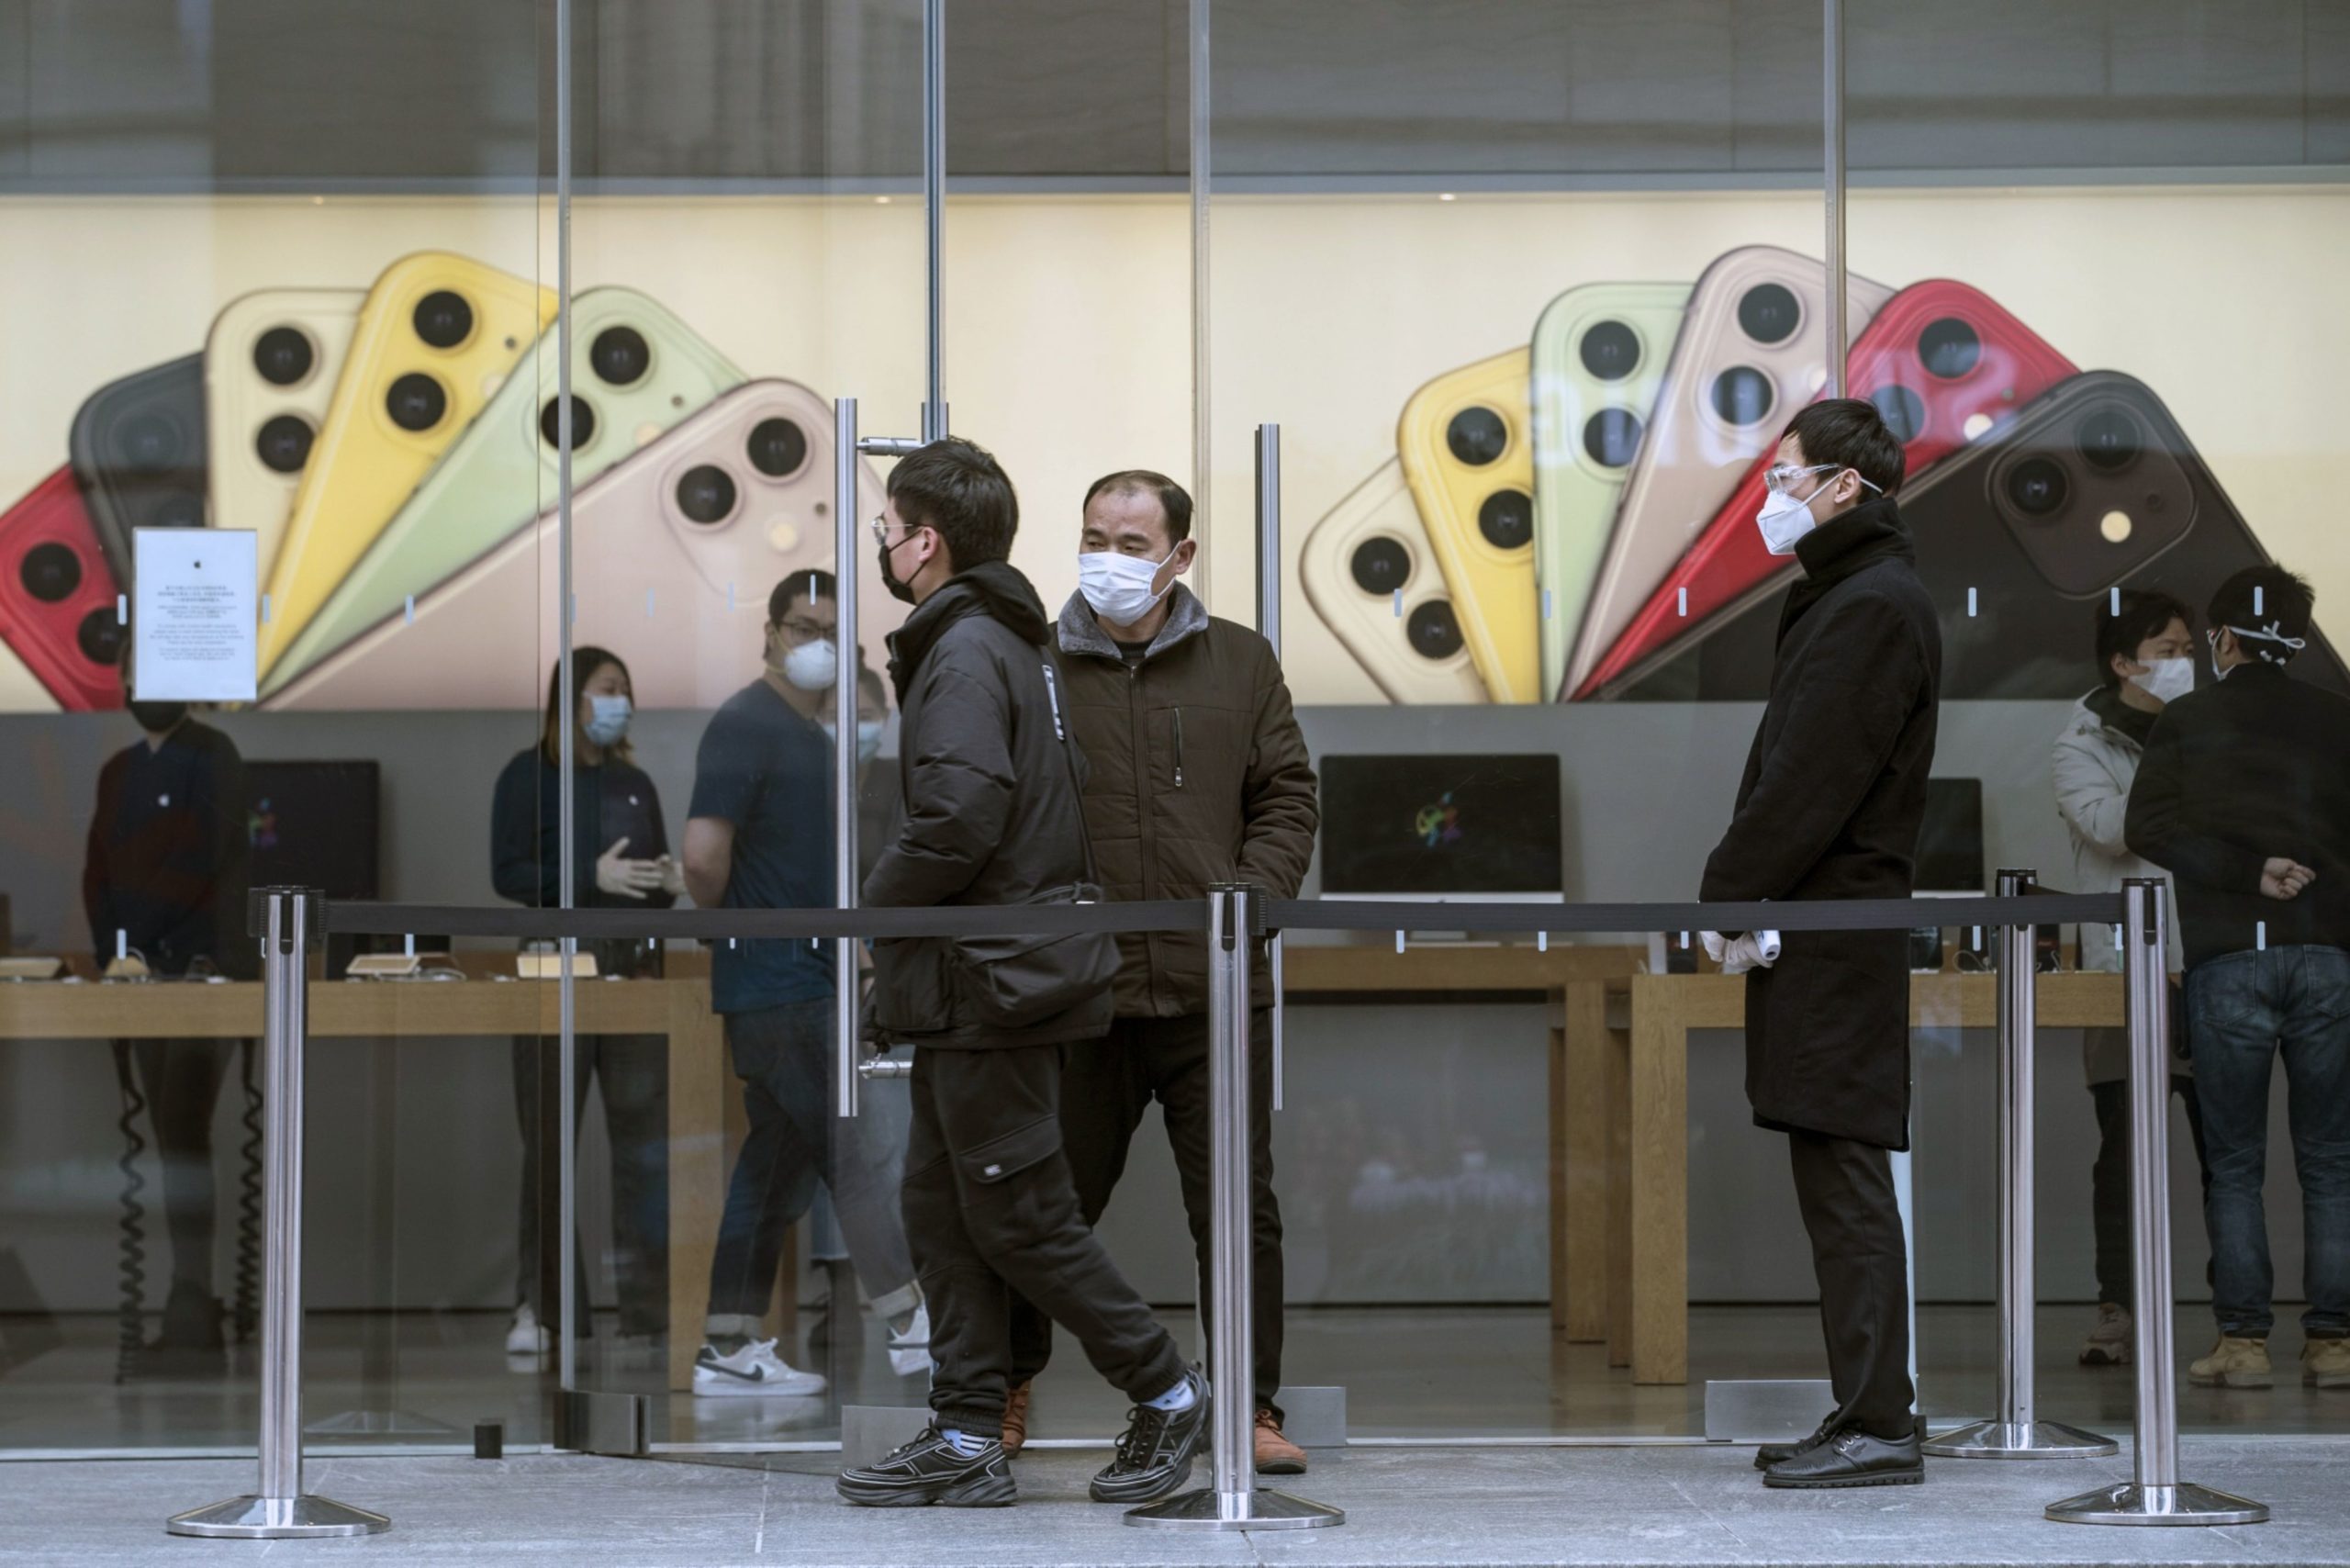 Customers wearing protective masks exit an Apple Inc. store in Shanghai, China, on Monday, March 2, 2020. The pressure to get China back to work after the coronavirus shutdown is resurrecting an old temptation: doctoring data so it shows senior officials what they want to see. Photographer: Qilai Shen/Bloomberg